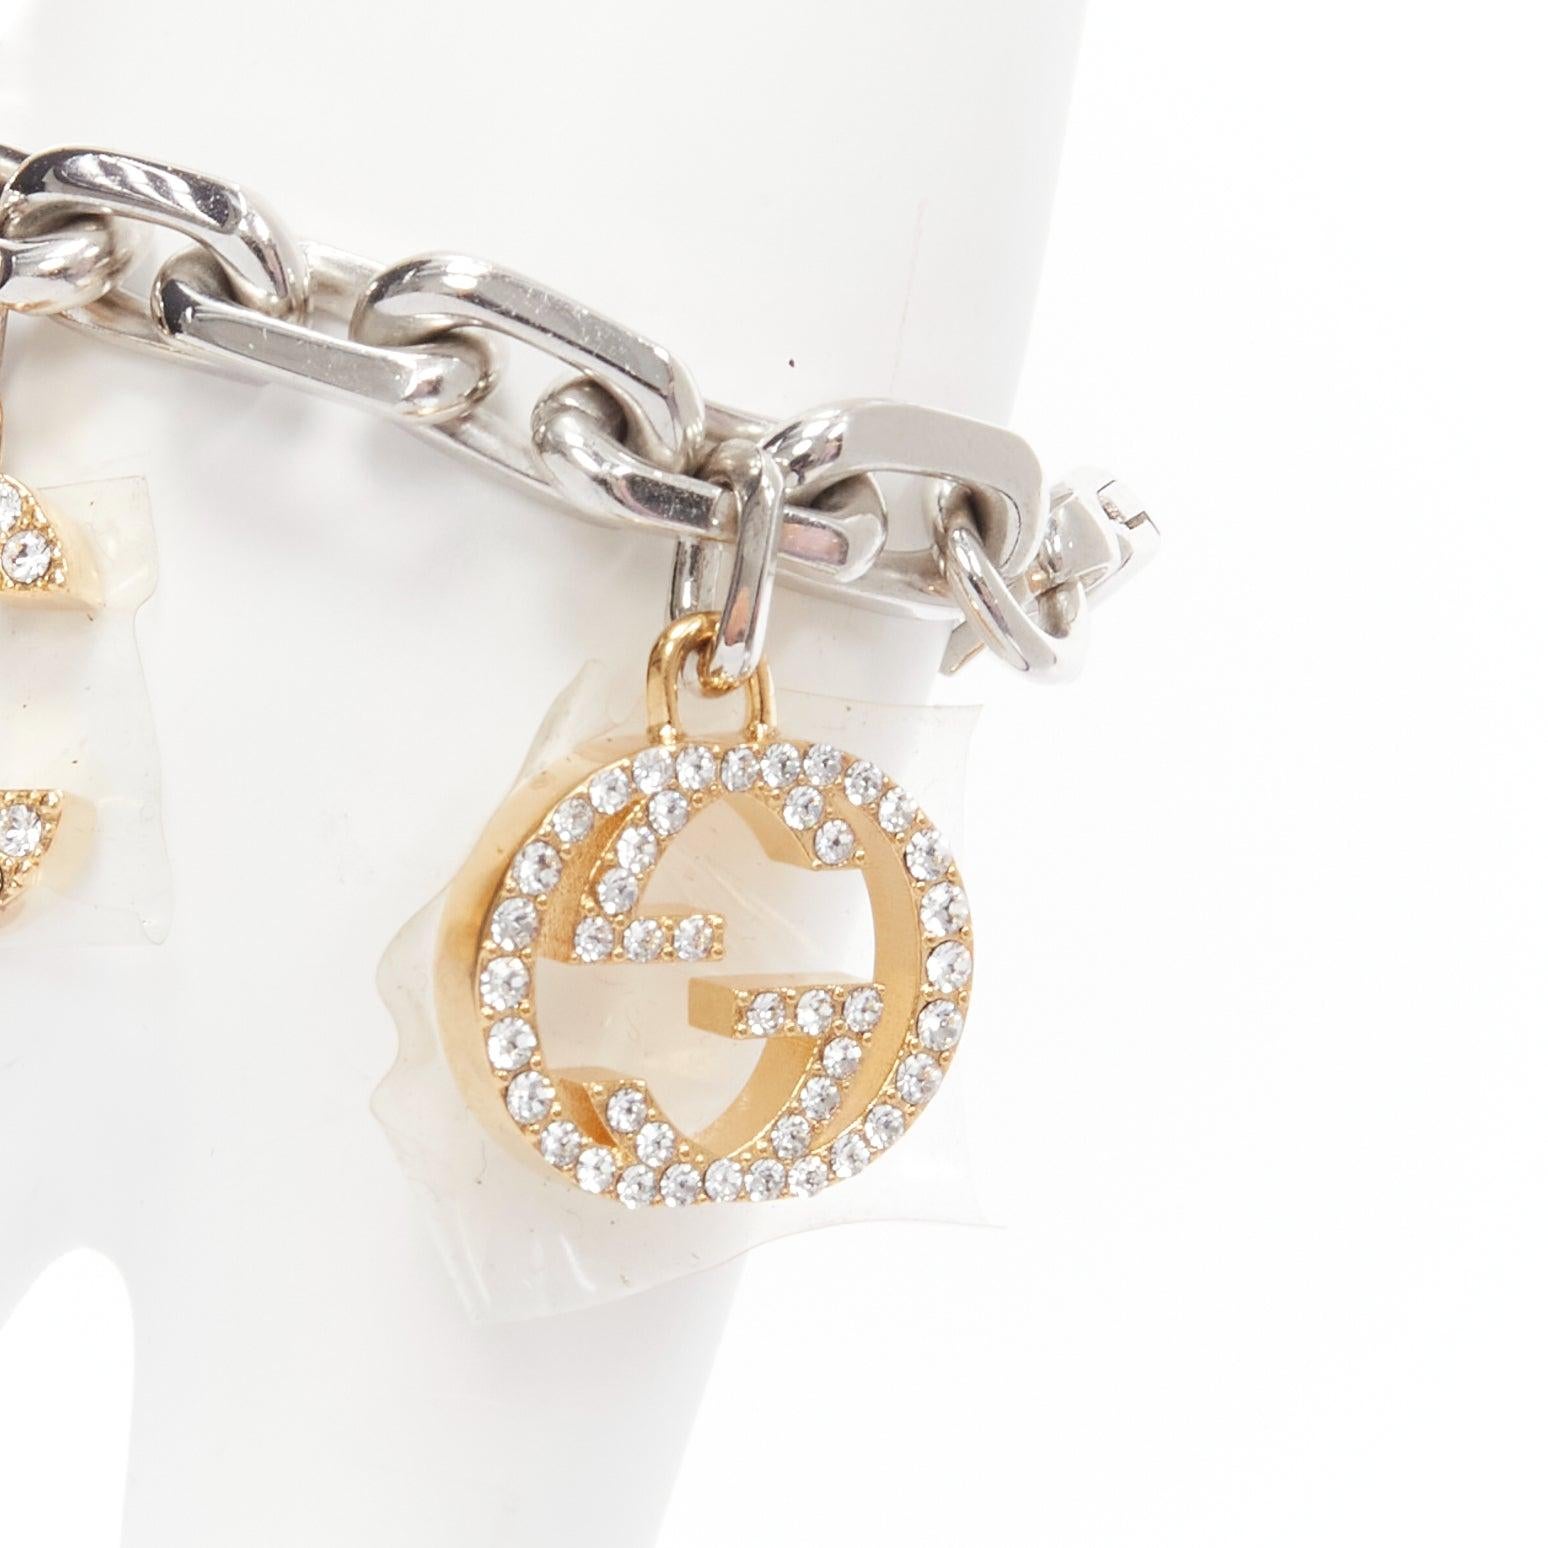 new GUCCI BALENCIAGA 2021 Hacker Project gold silver GG B logo charms bracelet
Reference: TGAS/D00598
Brand: Gucci
Designer: Alessandro Michele
Collection: BALENCIAGA 2021 Hacker Project
Material: Metal
Color: Silver, Gold
Pattern: Solid
Closure: